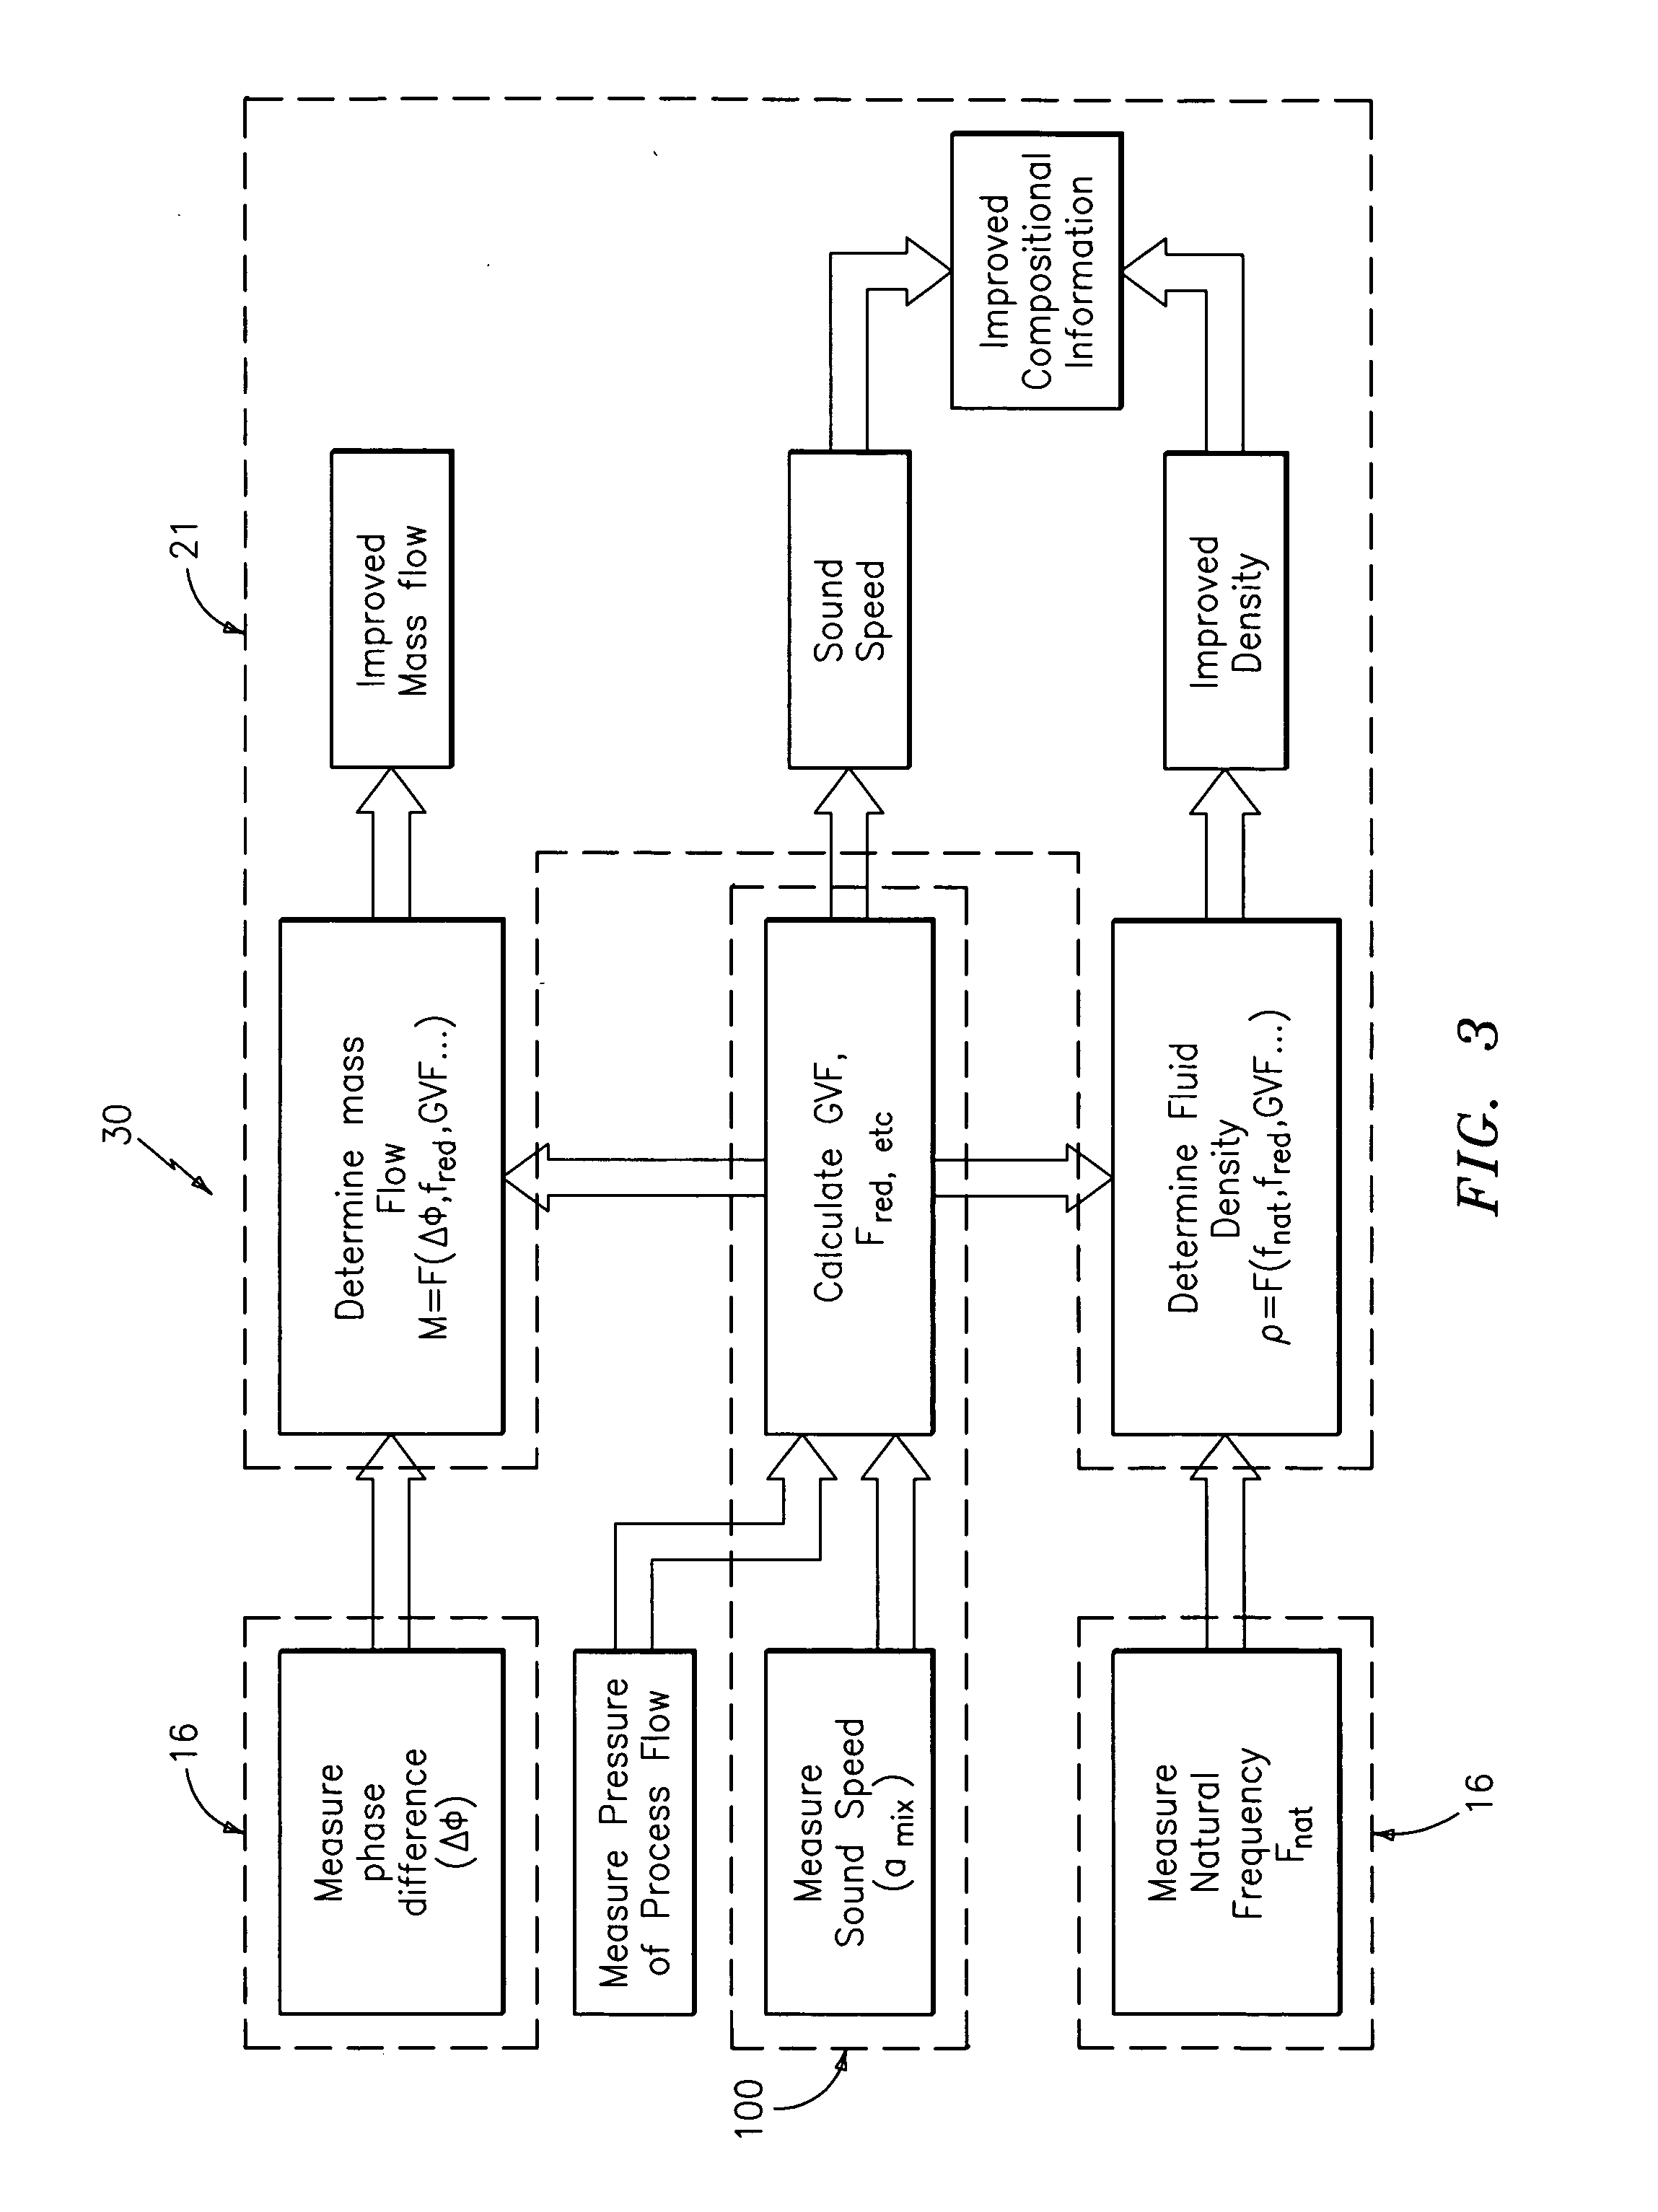 Apparatus and method for compensating a coriolis meter